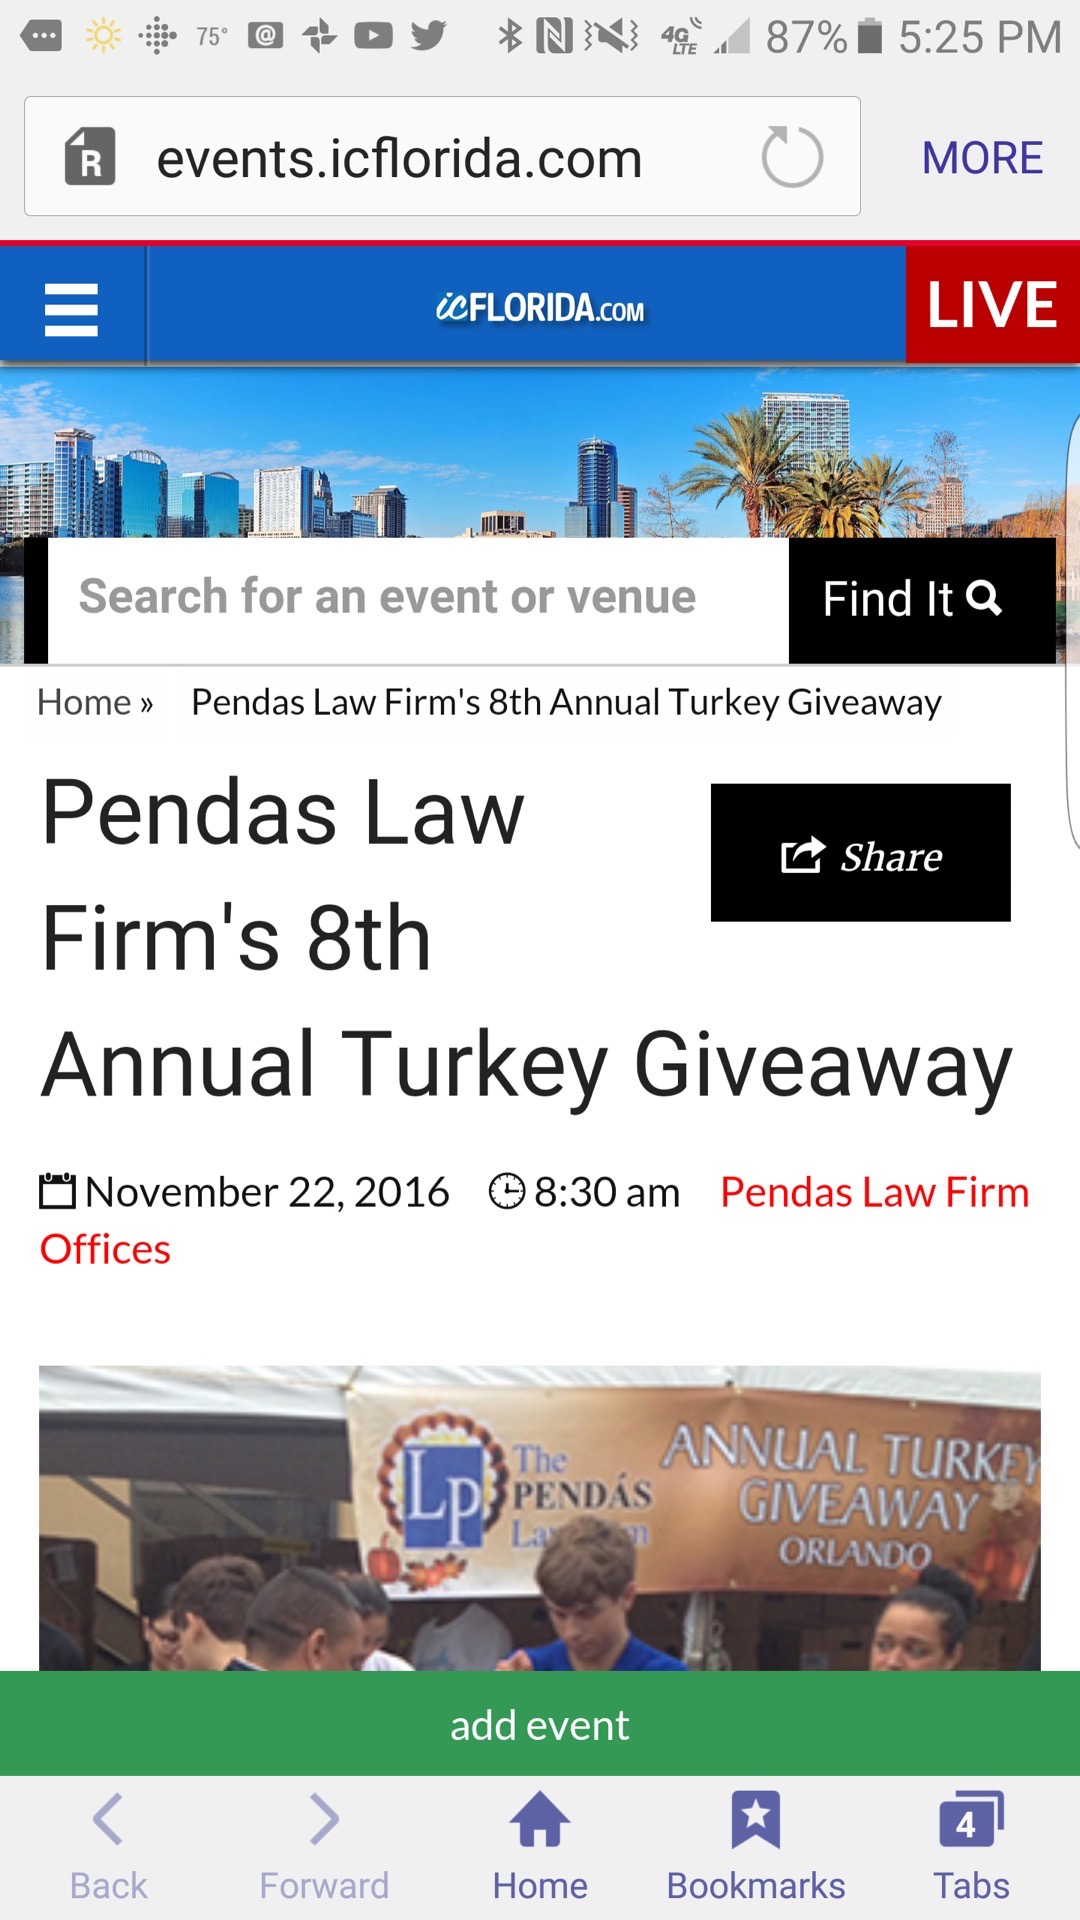 Turkey Event 2016-Image Gallery | The Pendas Law Firm